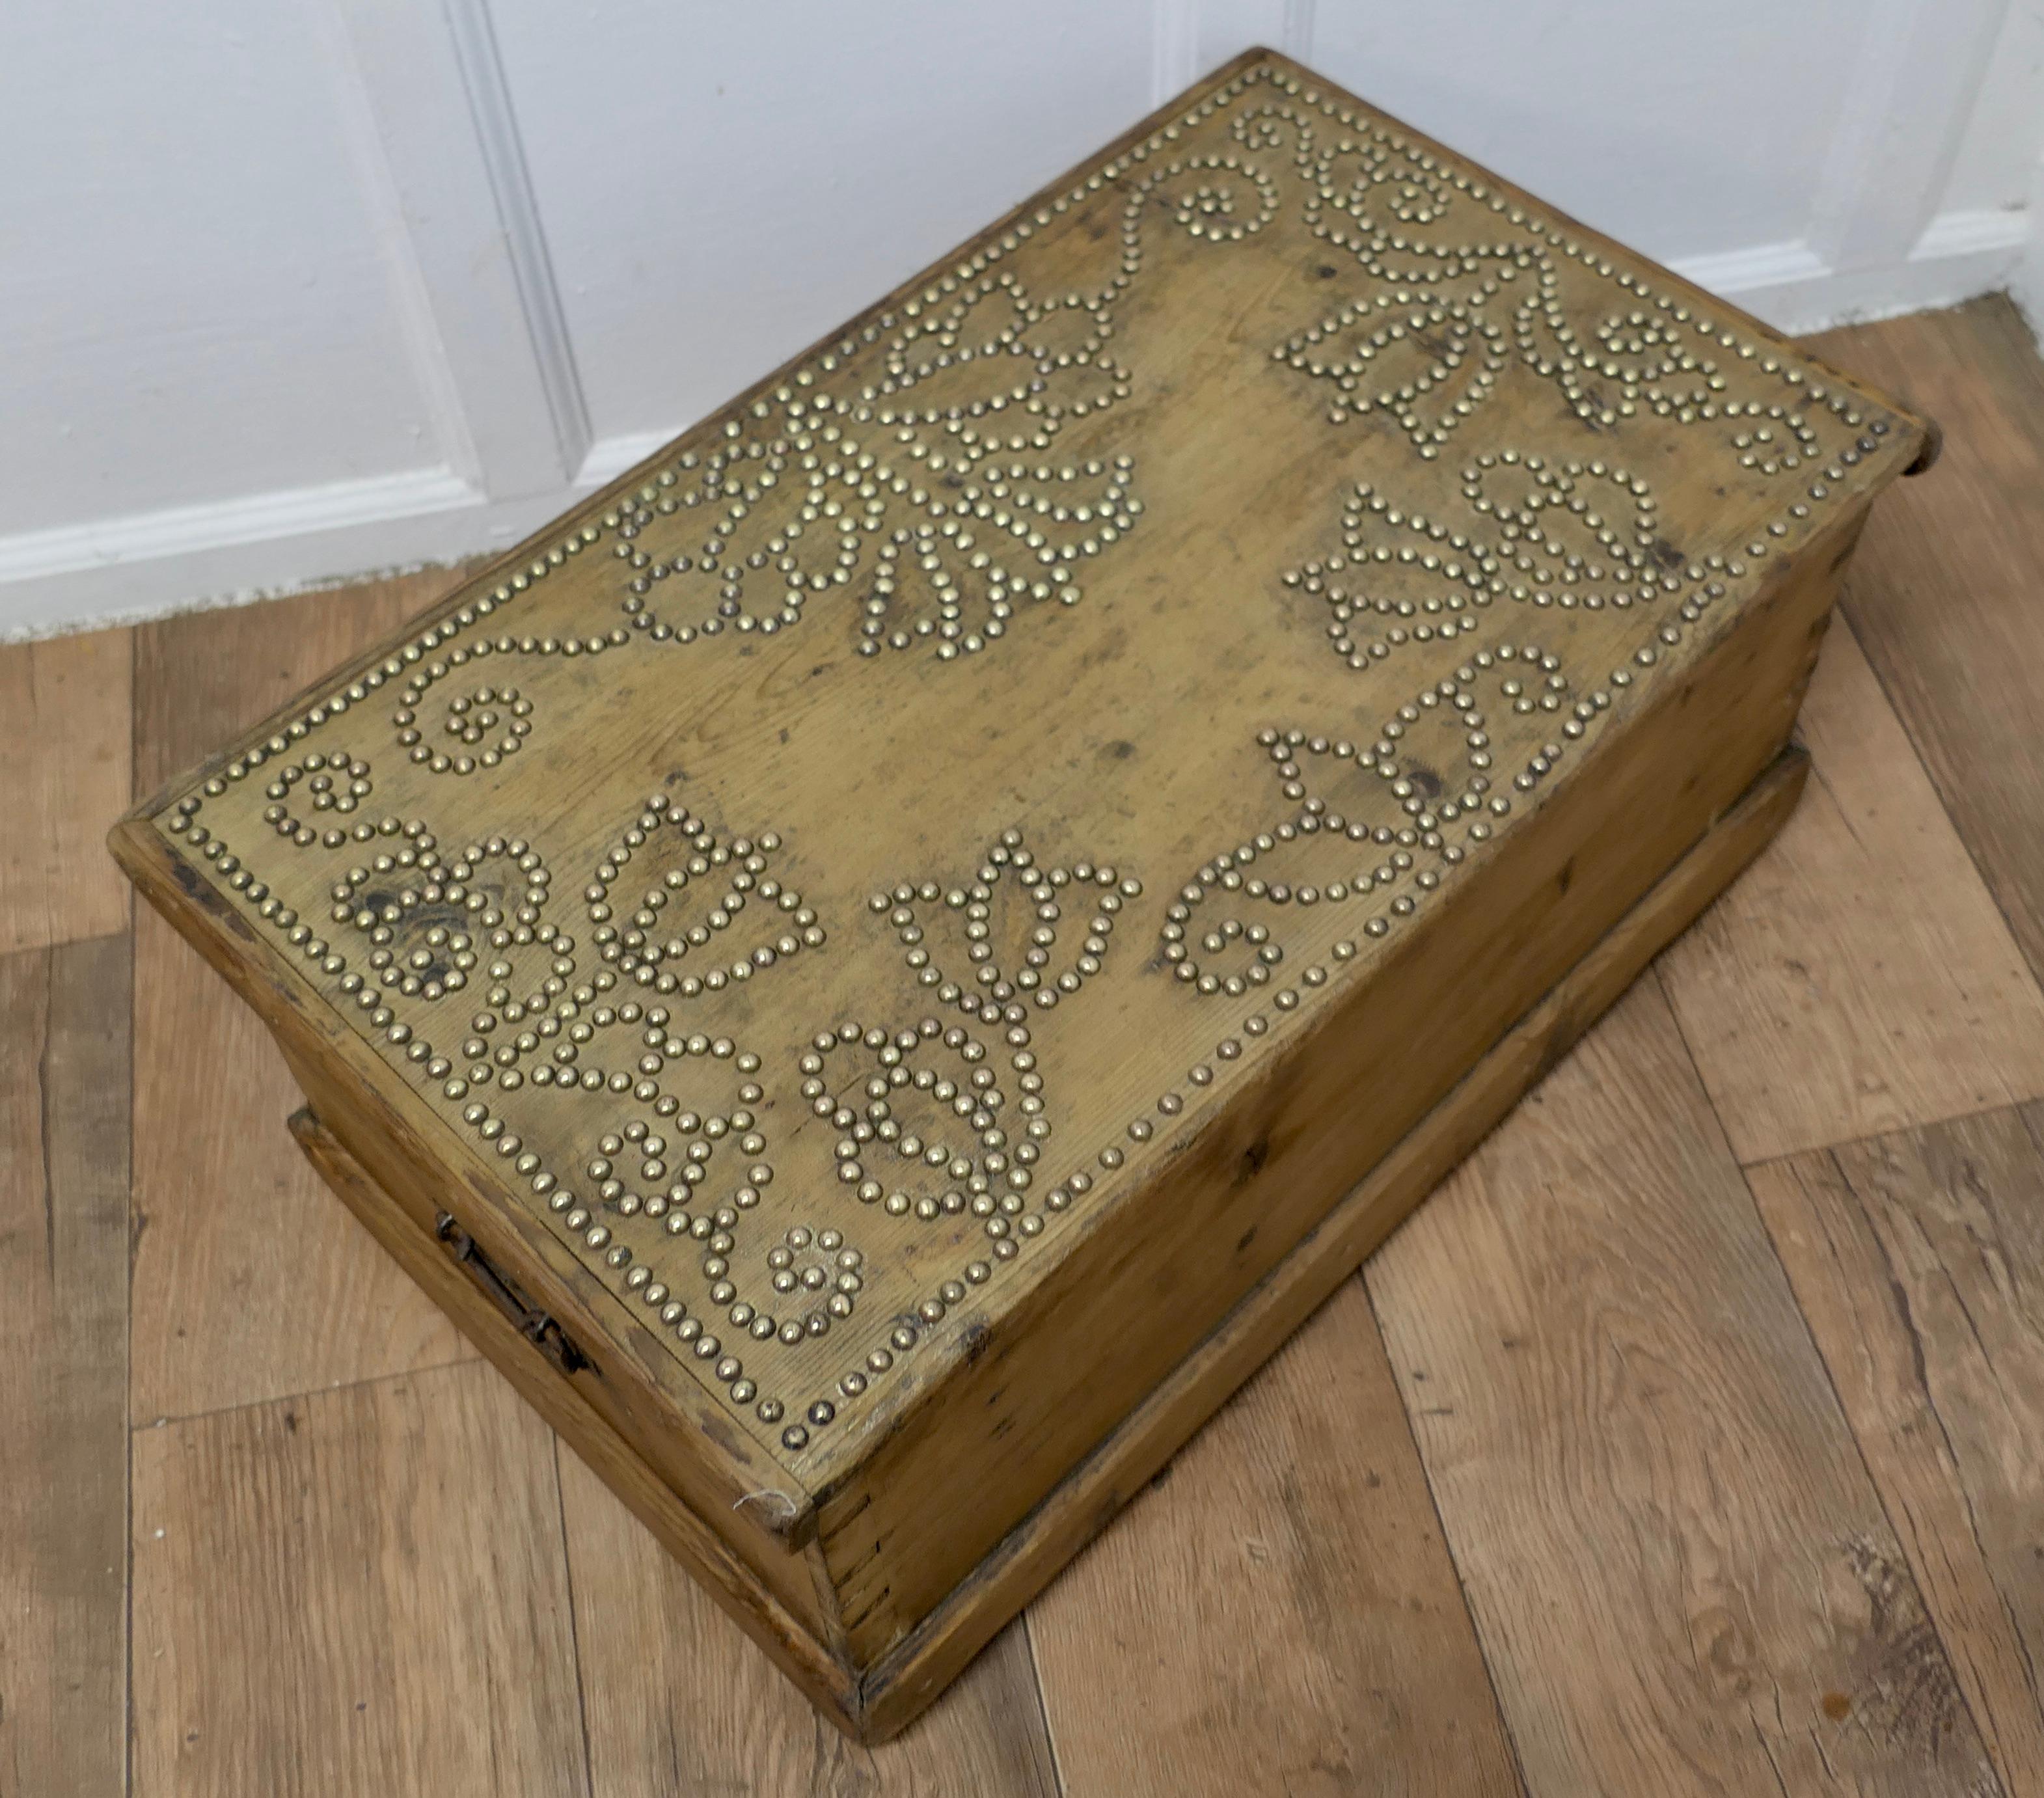 Folk Art Decorated Victorian Pine Blanket Box with Stud-work Design     For Sale